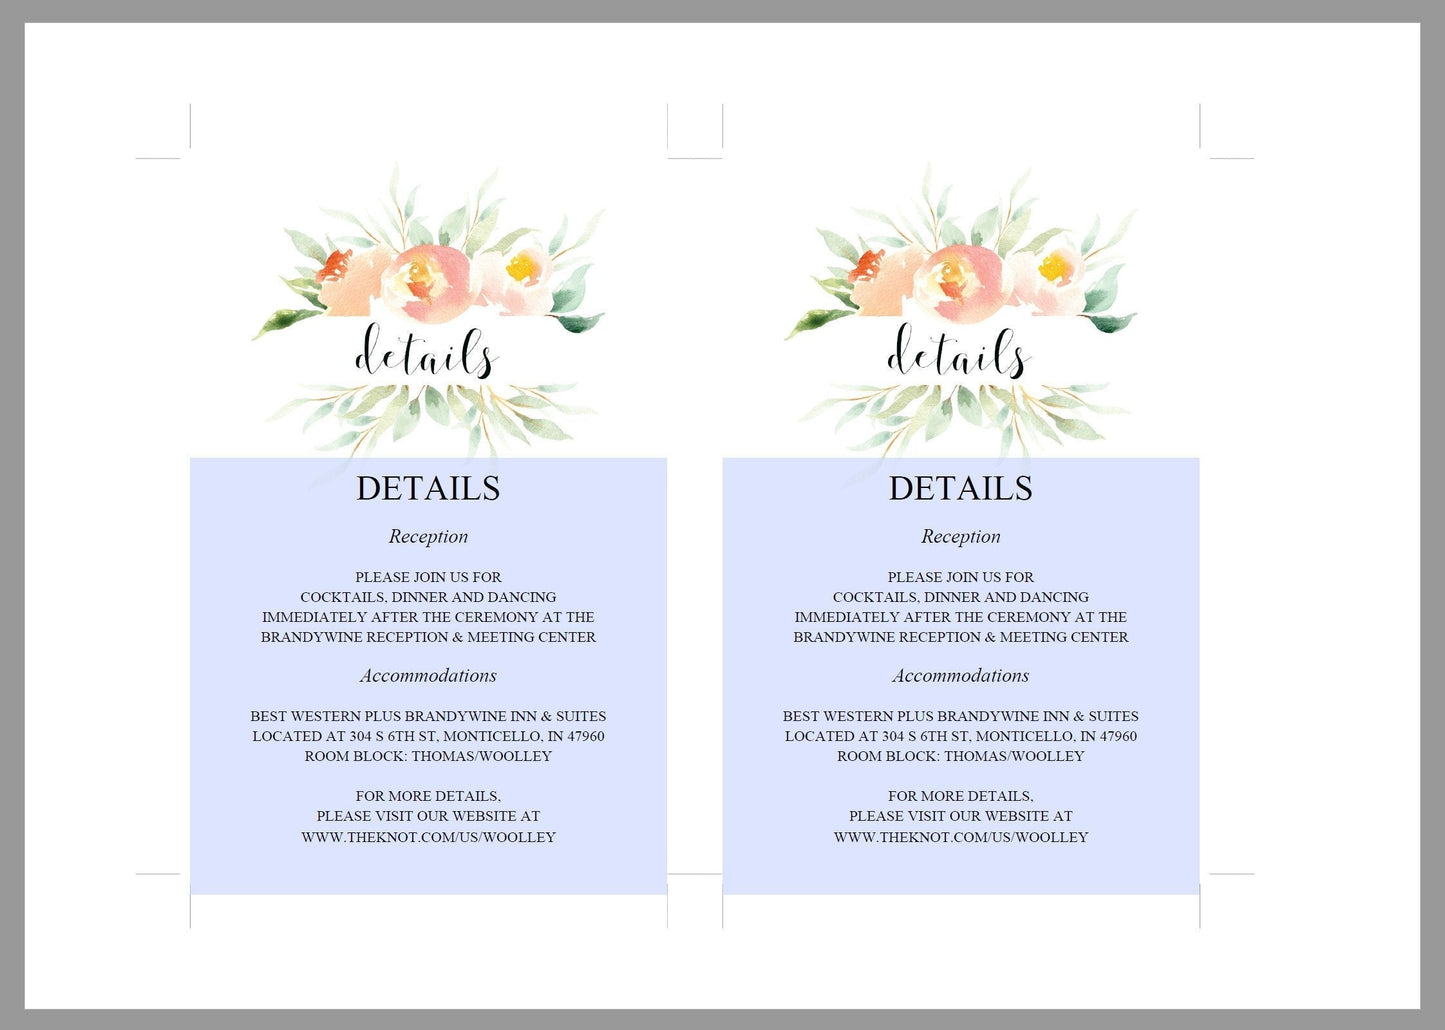 Wedding Details Card Template, Instant Download, Information Card, Wedding Info Card, Rustic Wedding,Details Template, Blush  - Sarah RSVP & DETAILS CARDS SAVVY PAPER CO